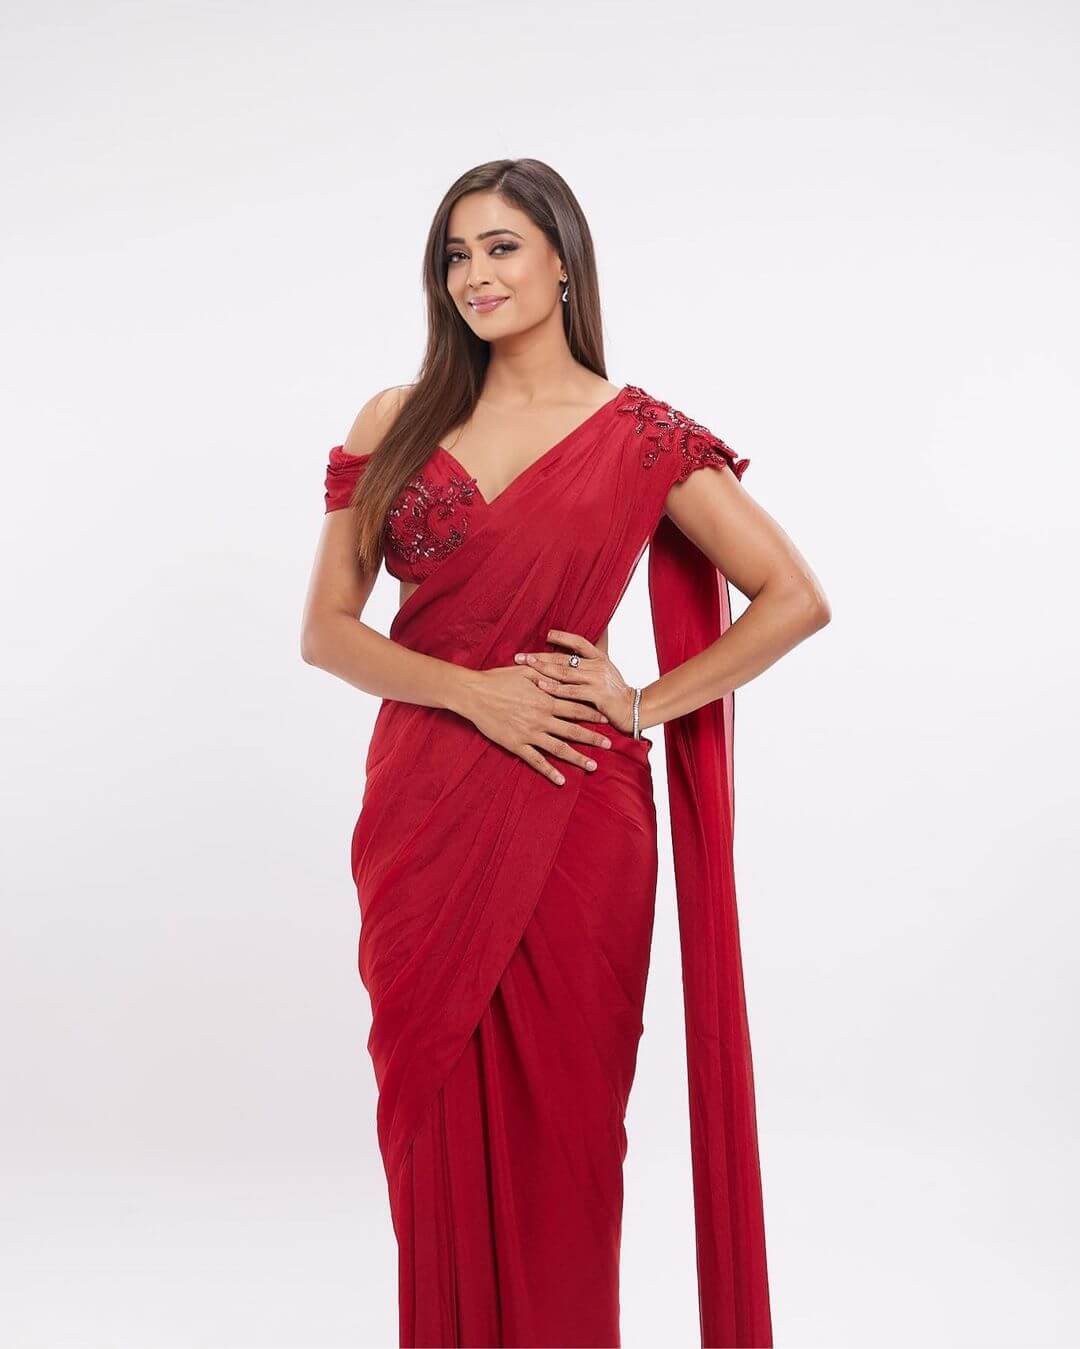 Shweta Tiwari Blow Our Mind In Cherry Red Saree With Off Shoulder Blouse. Is She Really In Her 40's